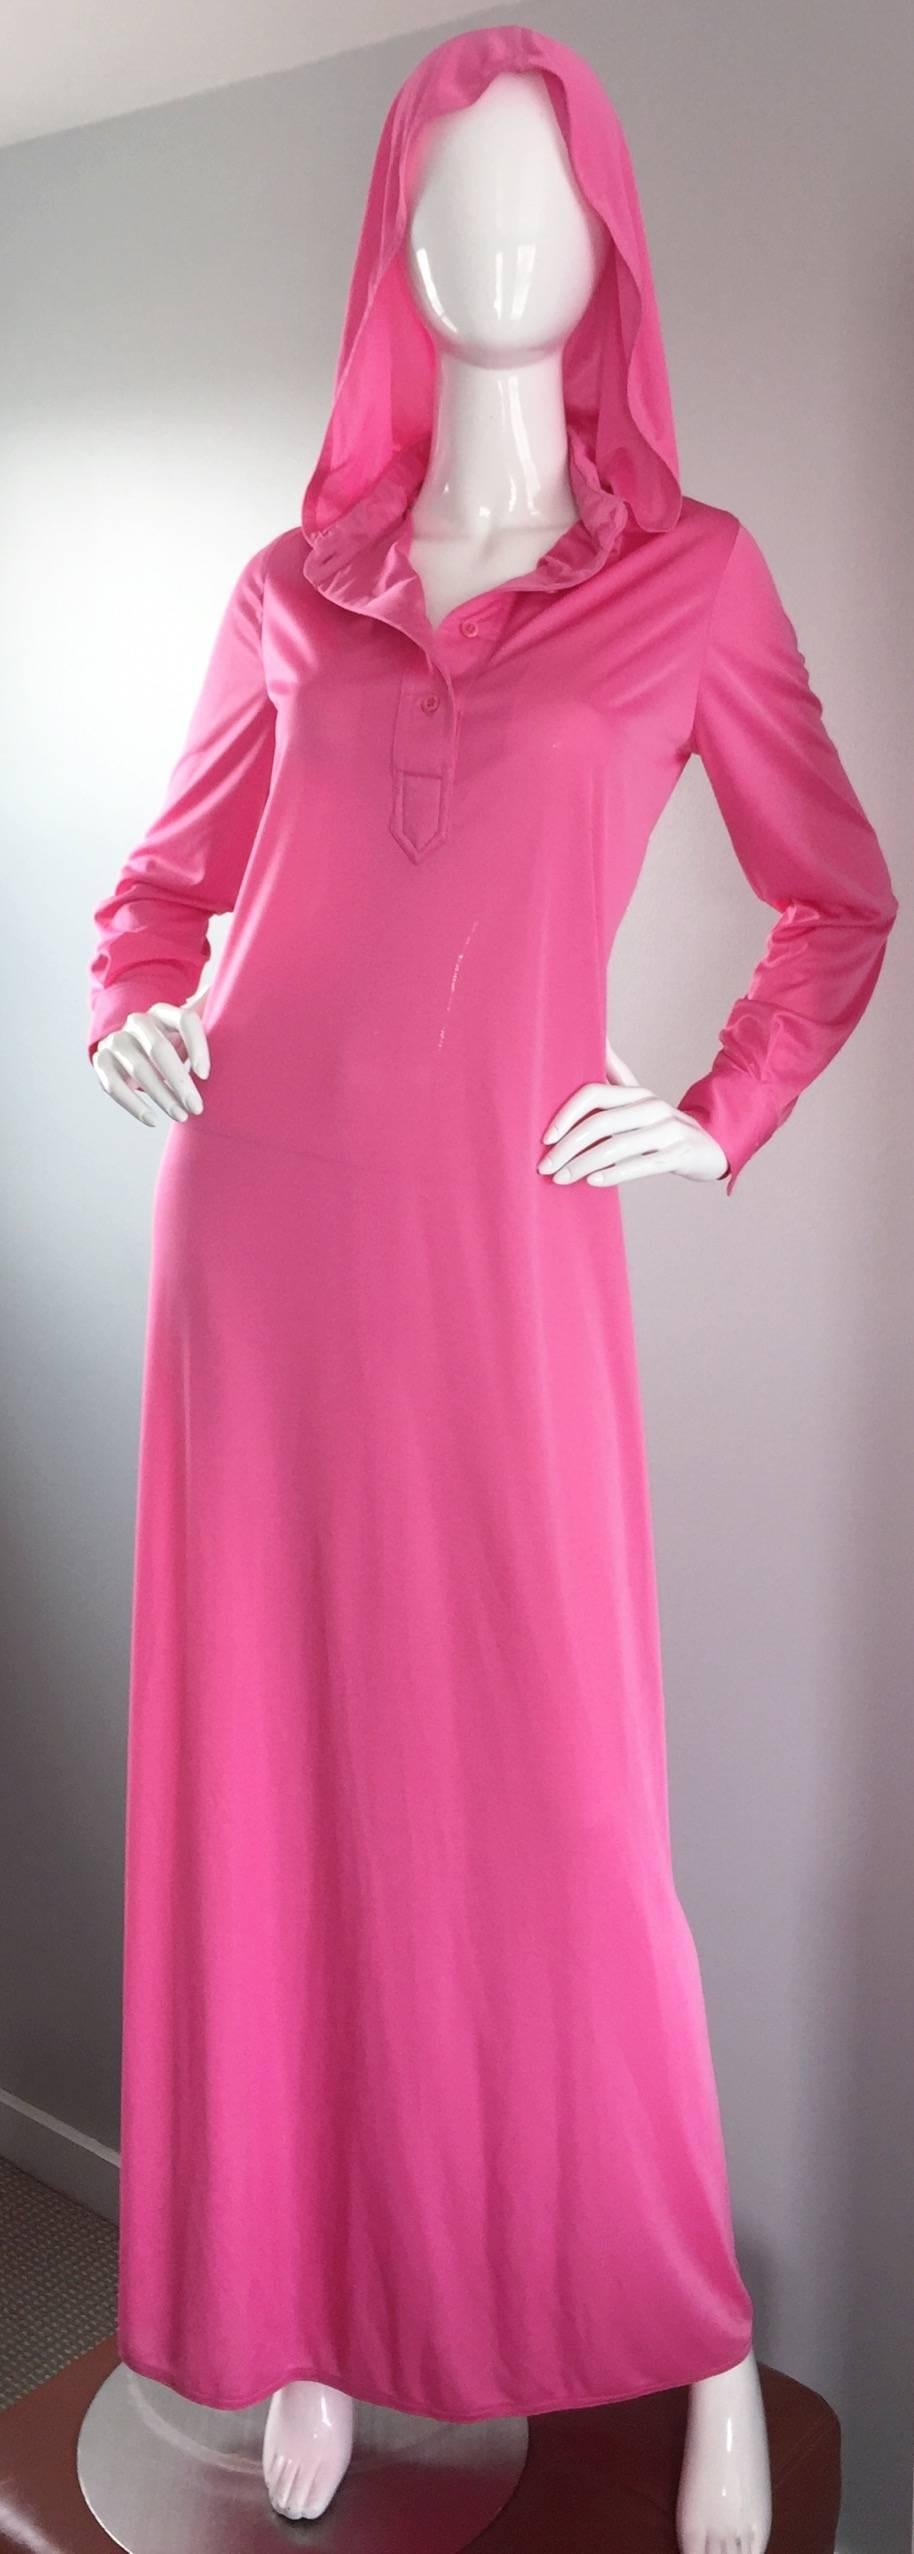 Important and super rare vintage GEOFFREY BEENE hooded hot pink caftan / kaftan! This iconic piece of fashion history has never been worn, and still has the original $3,000 price tag attached from the mid 1970s (equates to $13,671 today). Incredible